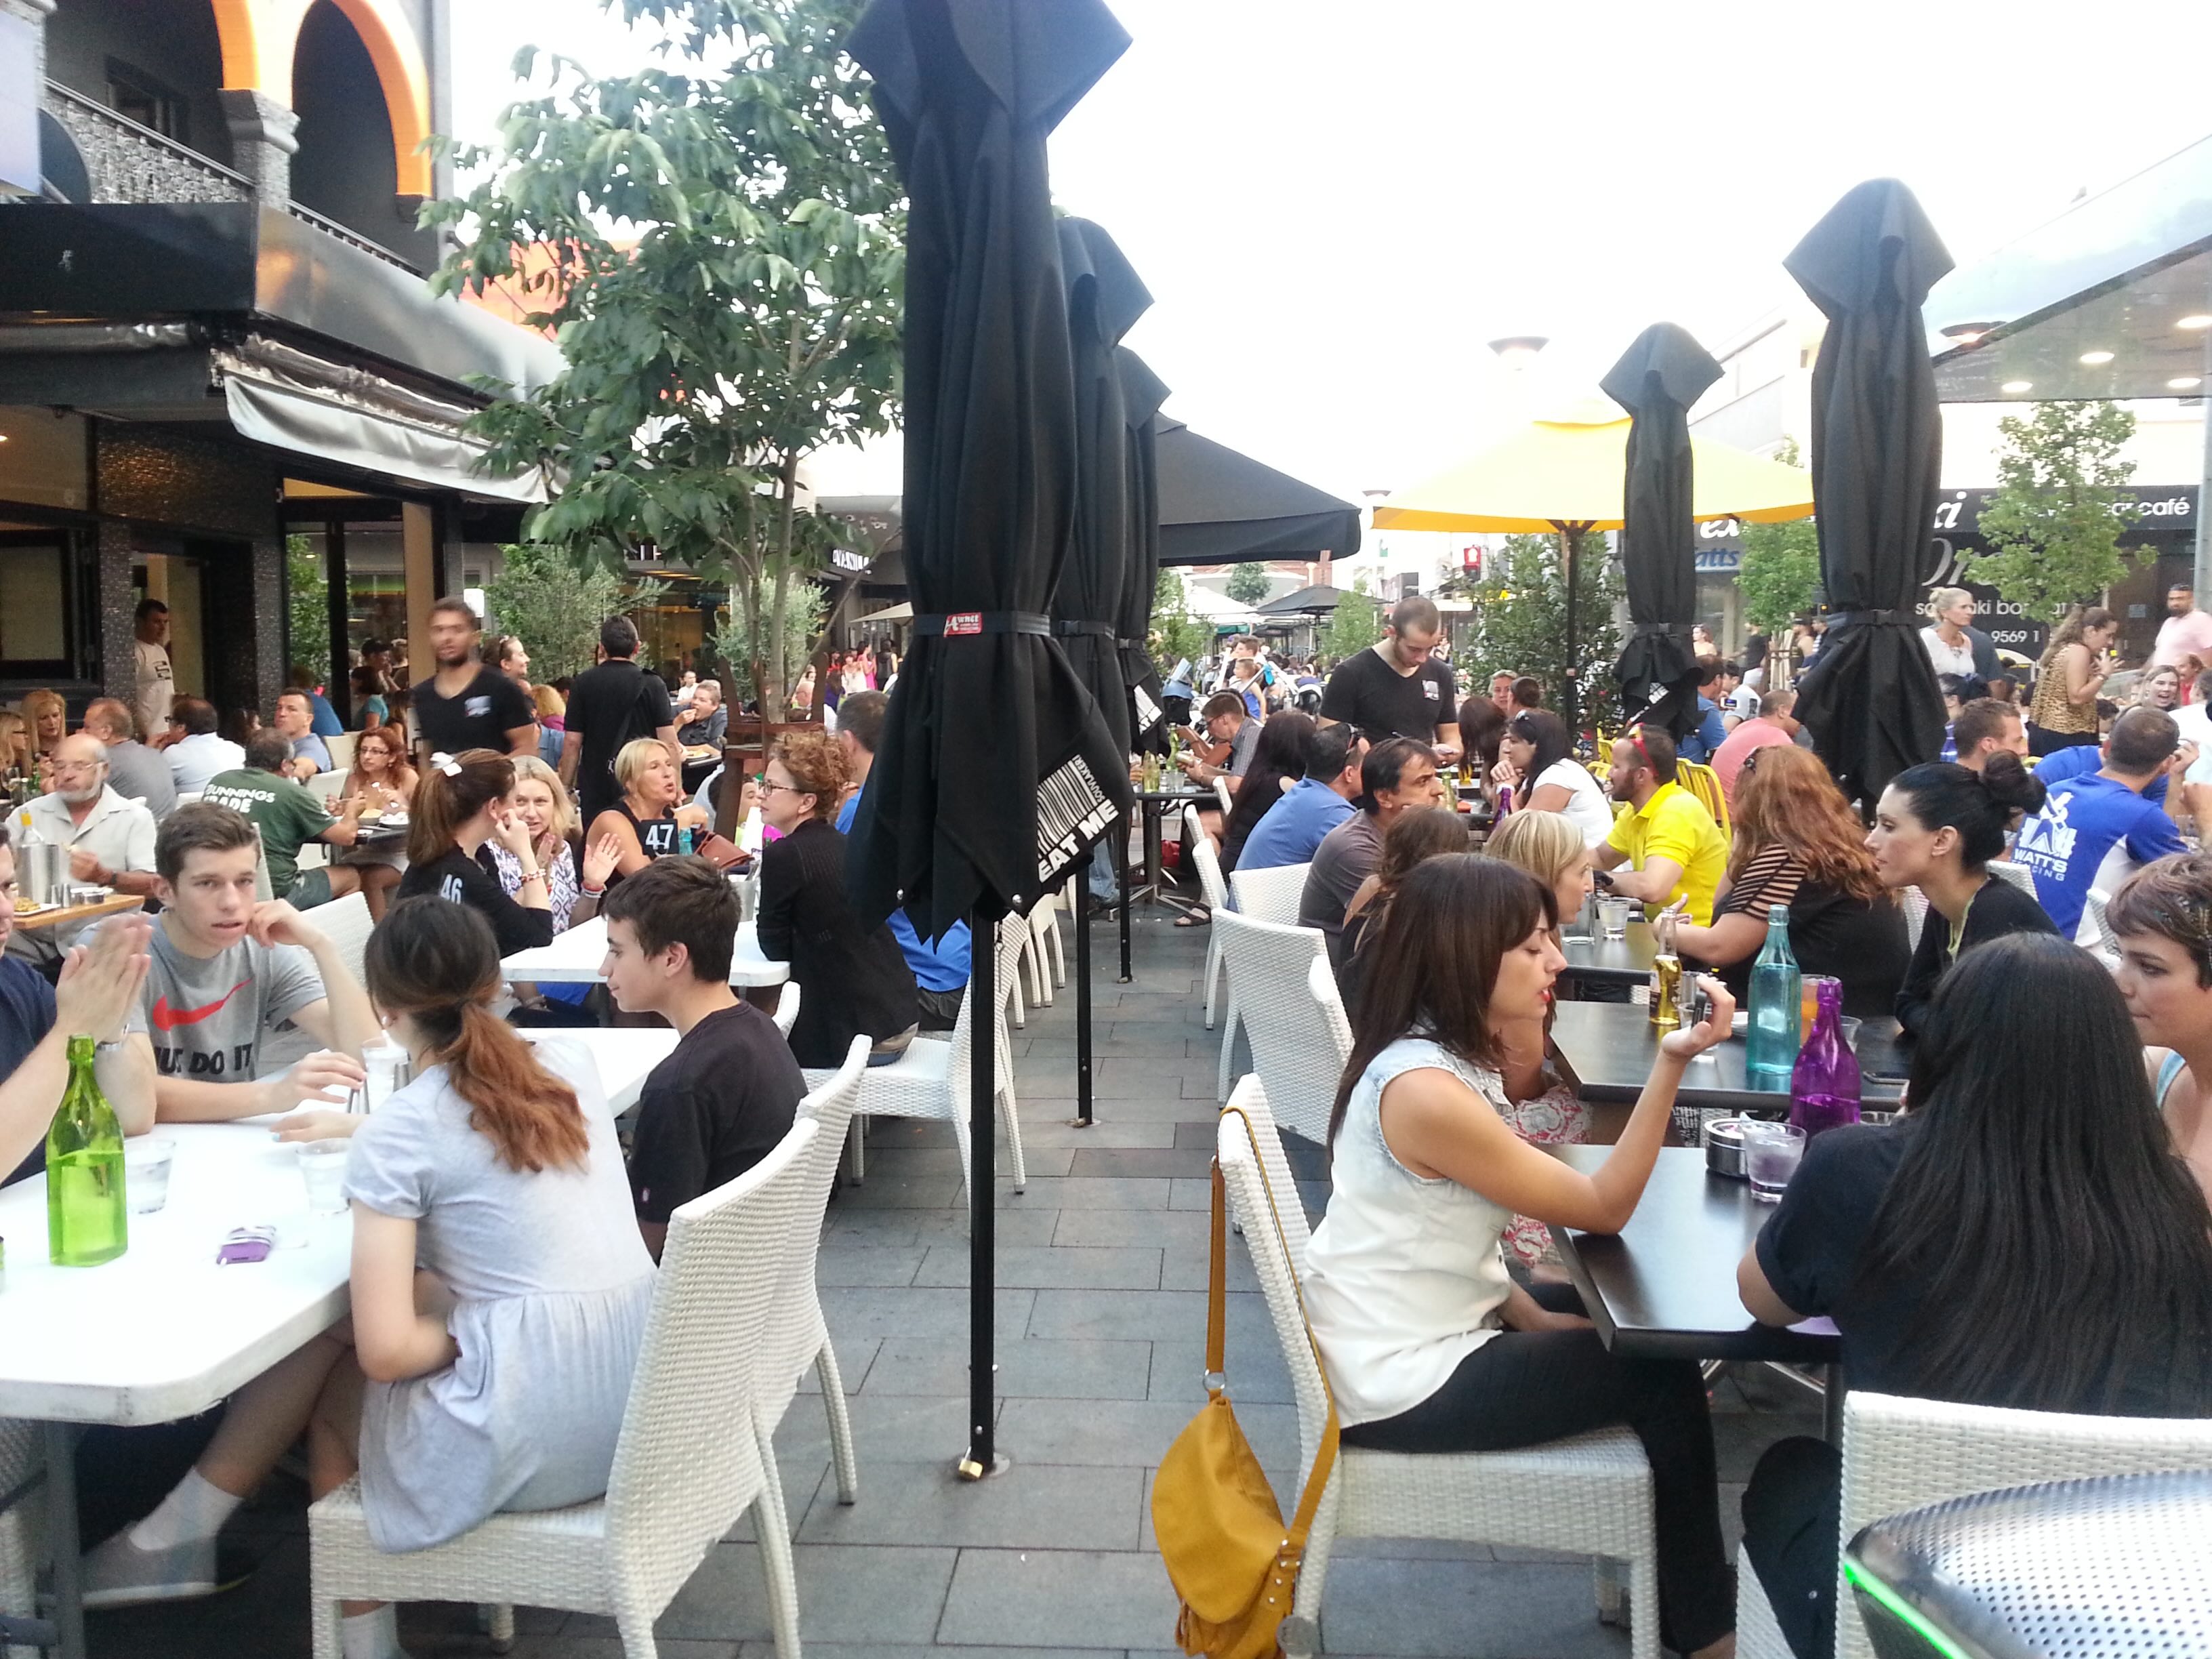 Diners and drinkers out in the sunshine at Eaton Mall